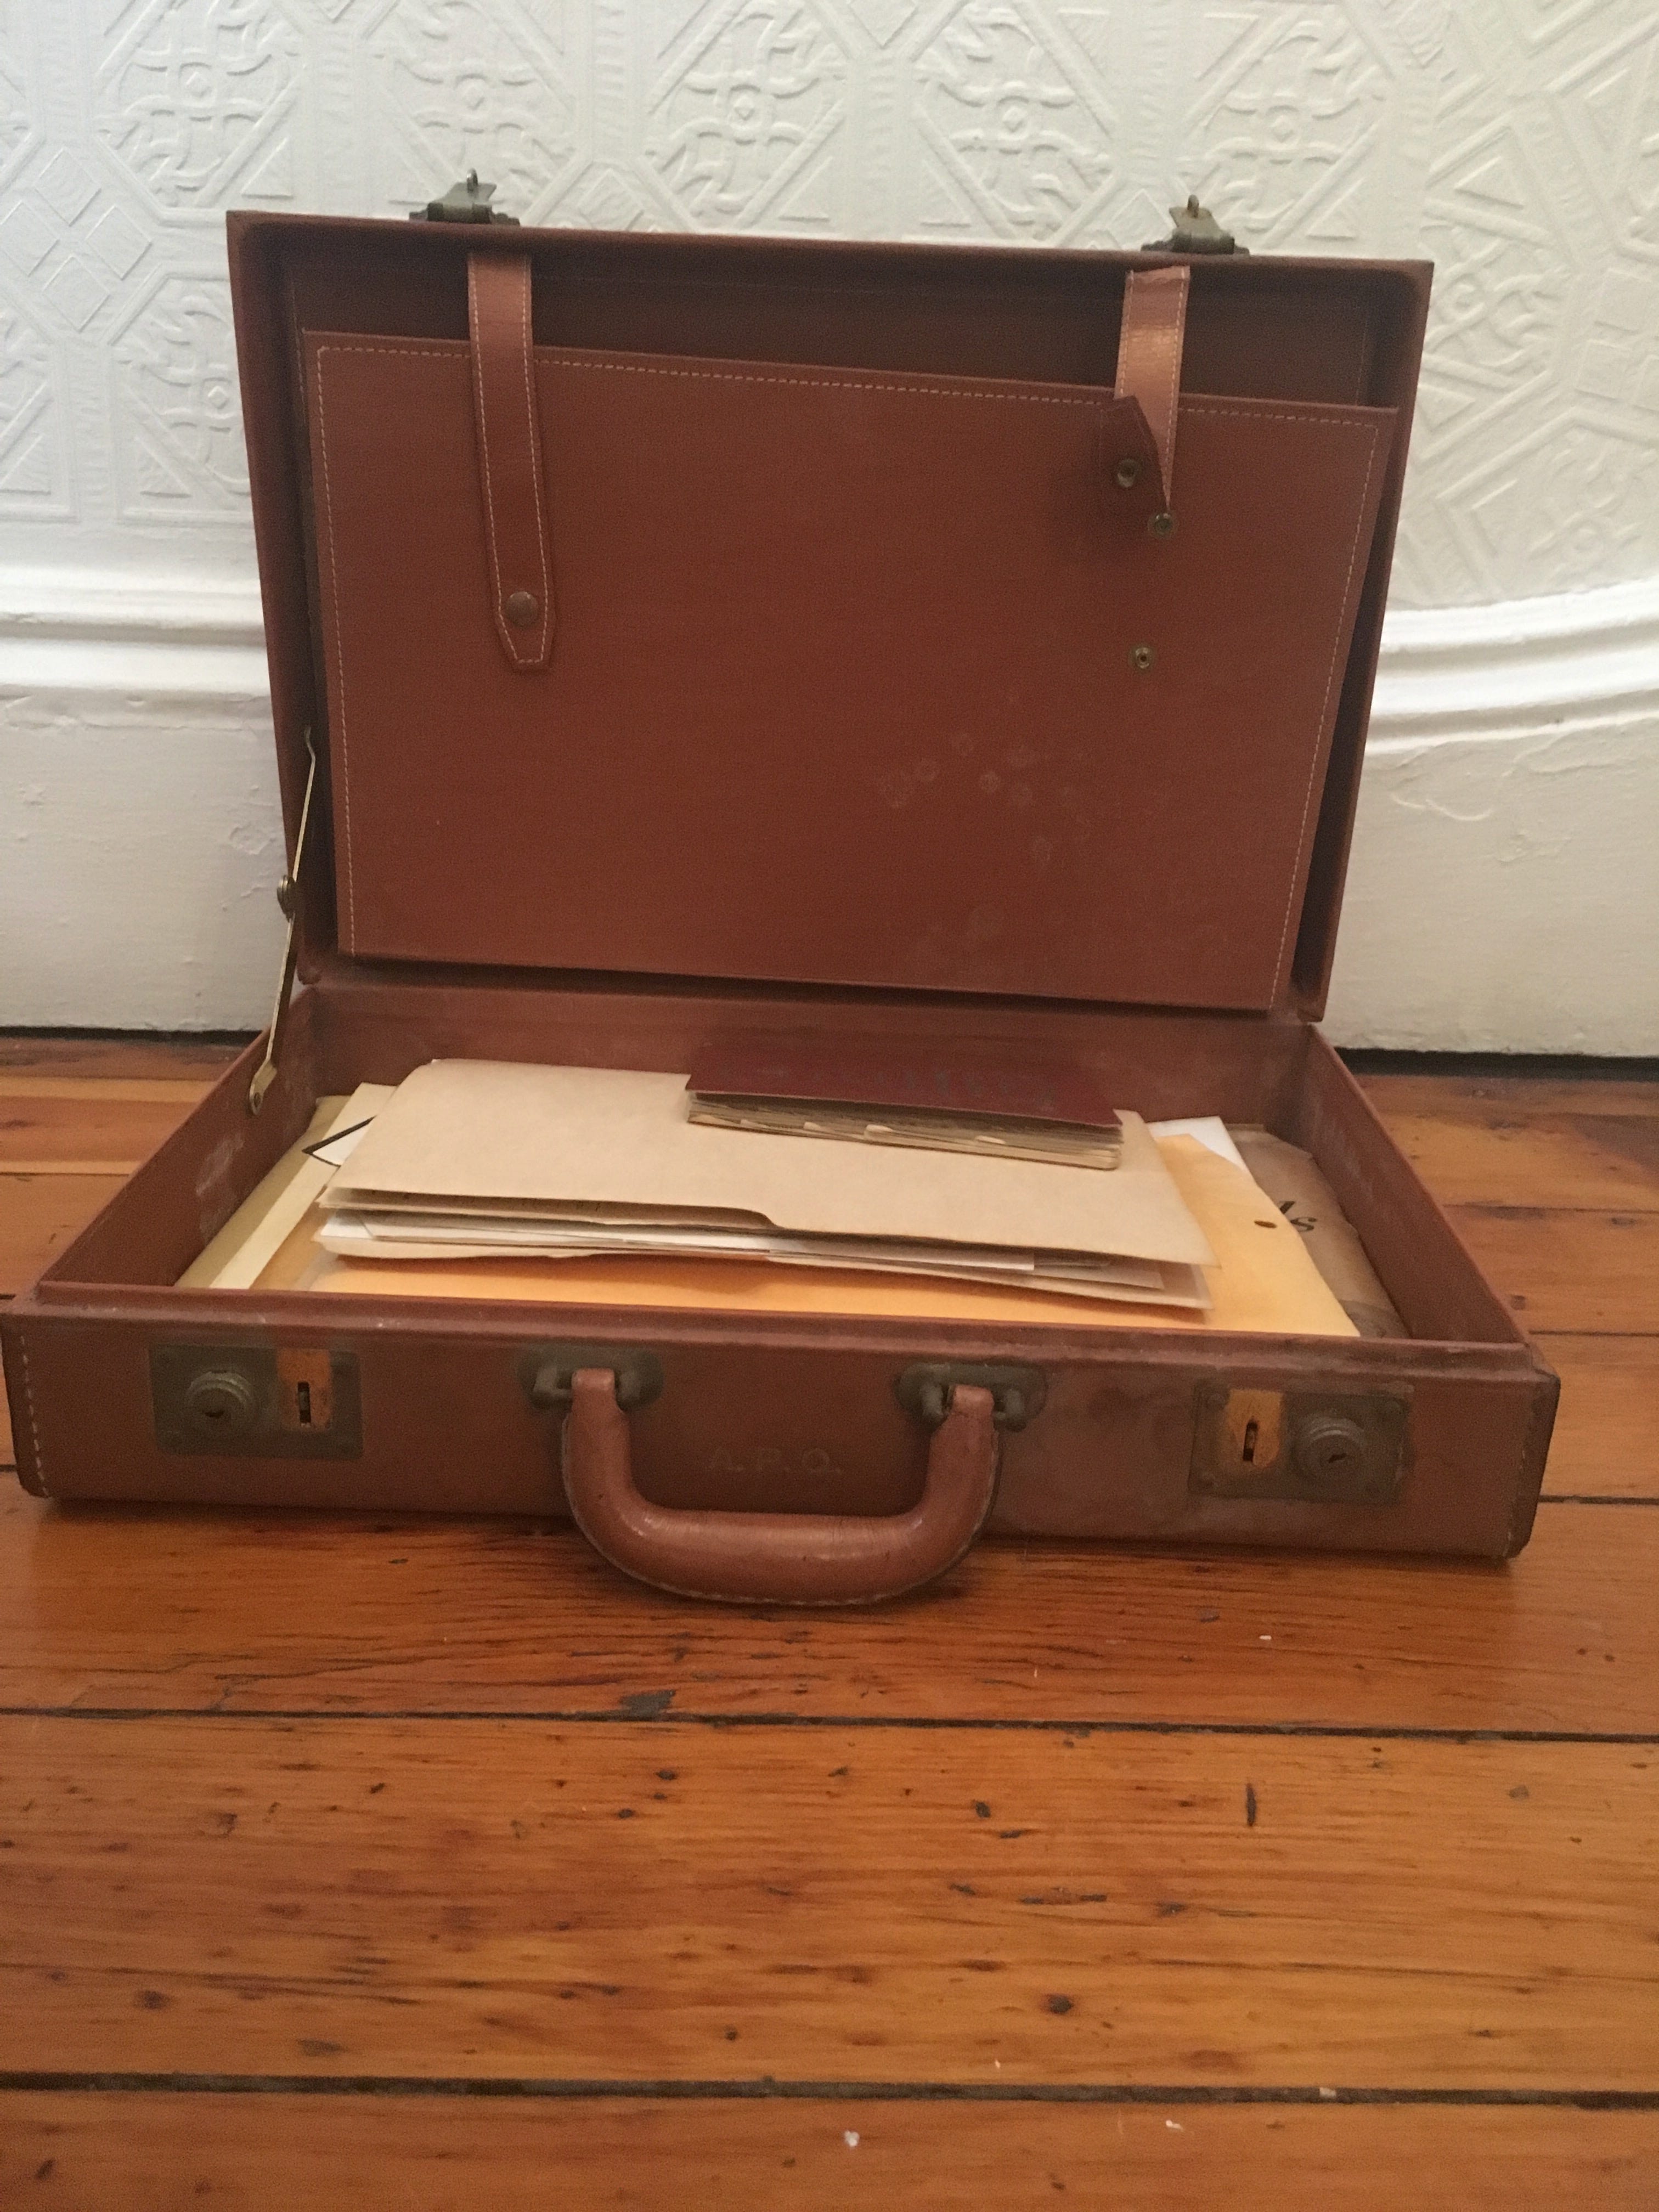 my grandfather's briefcase, address book, and some of his folders